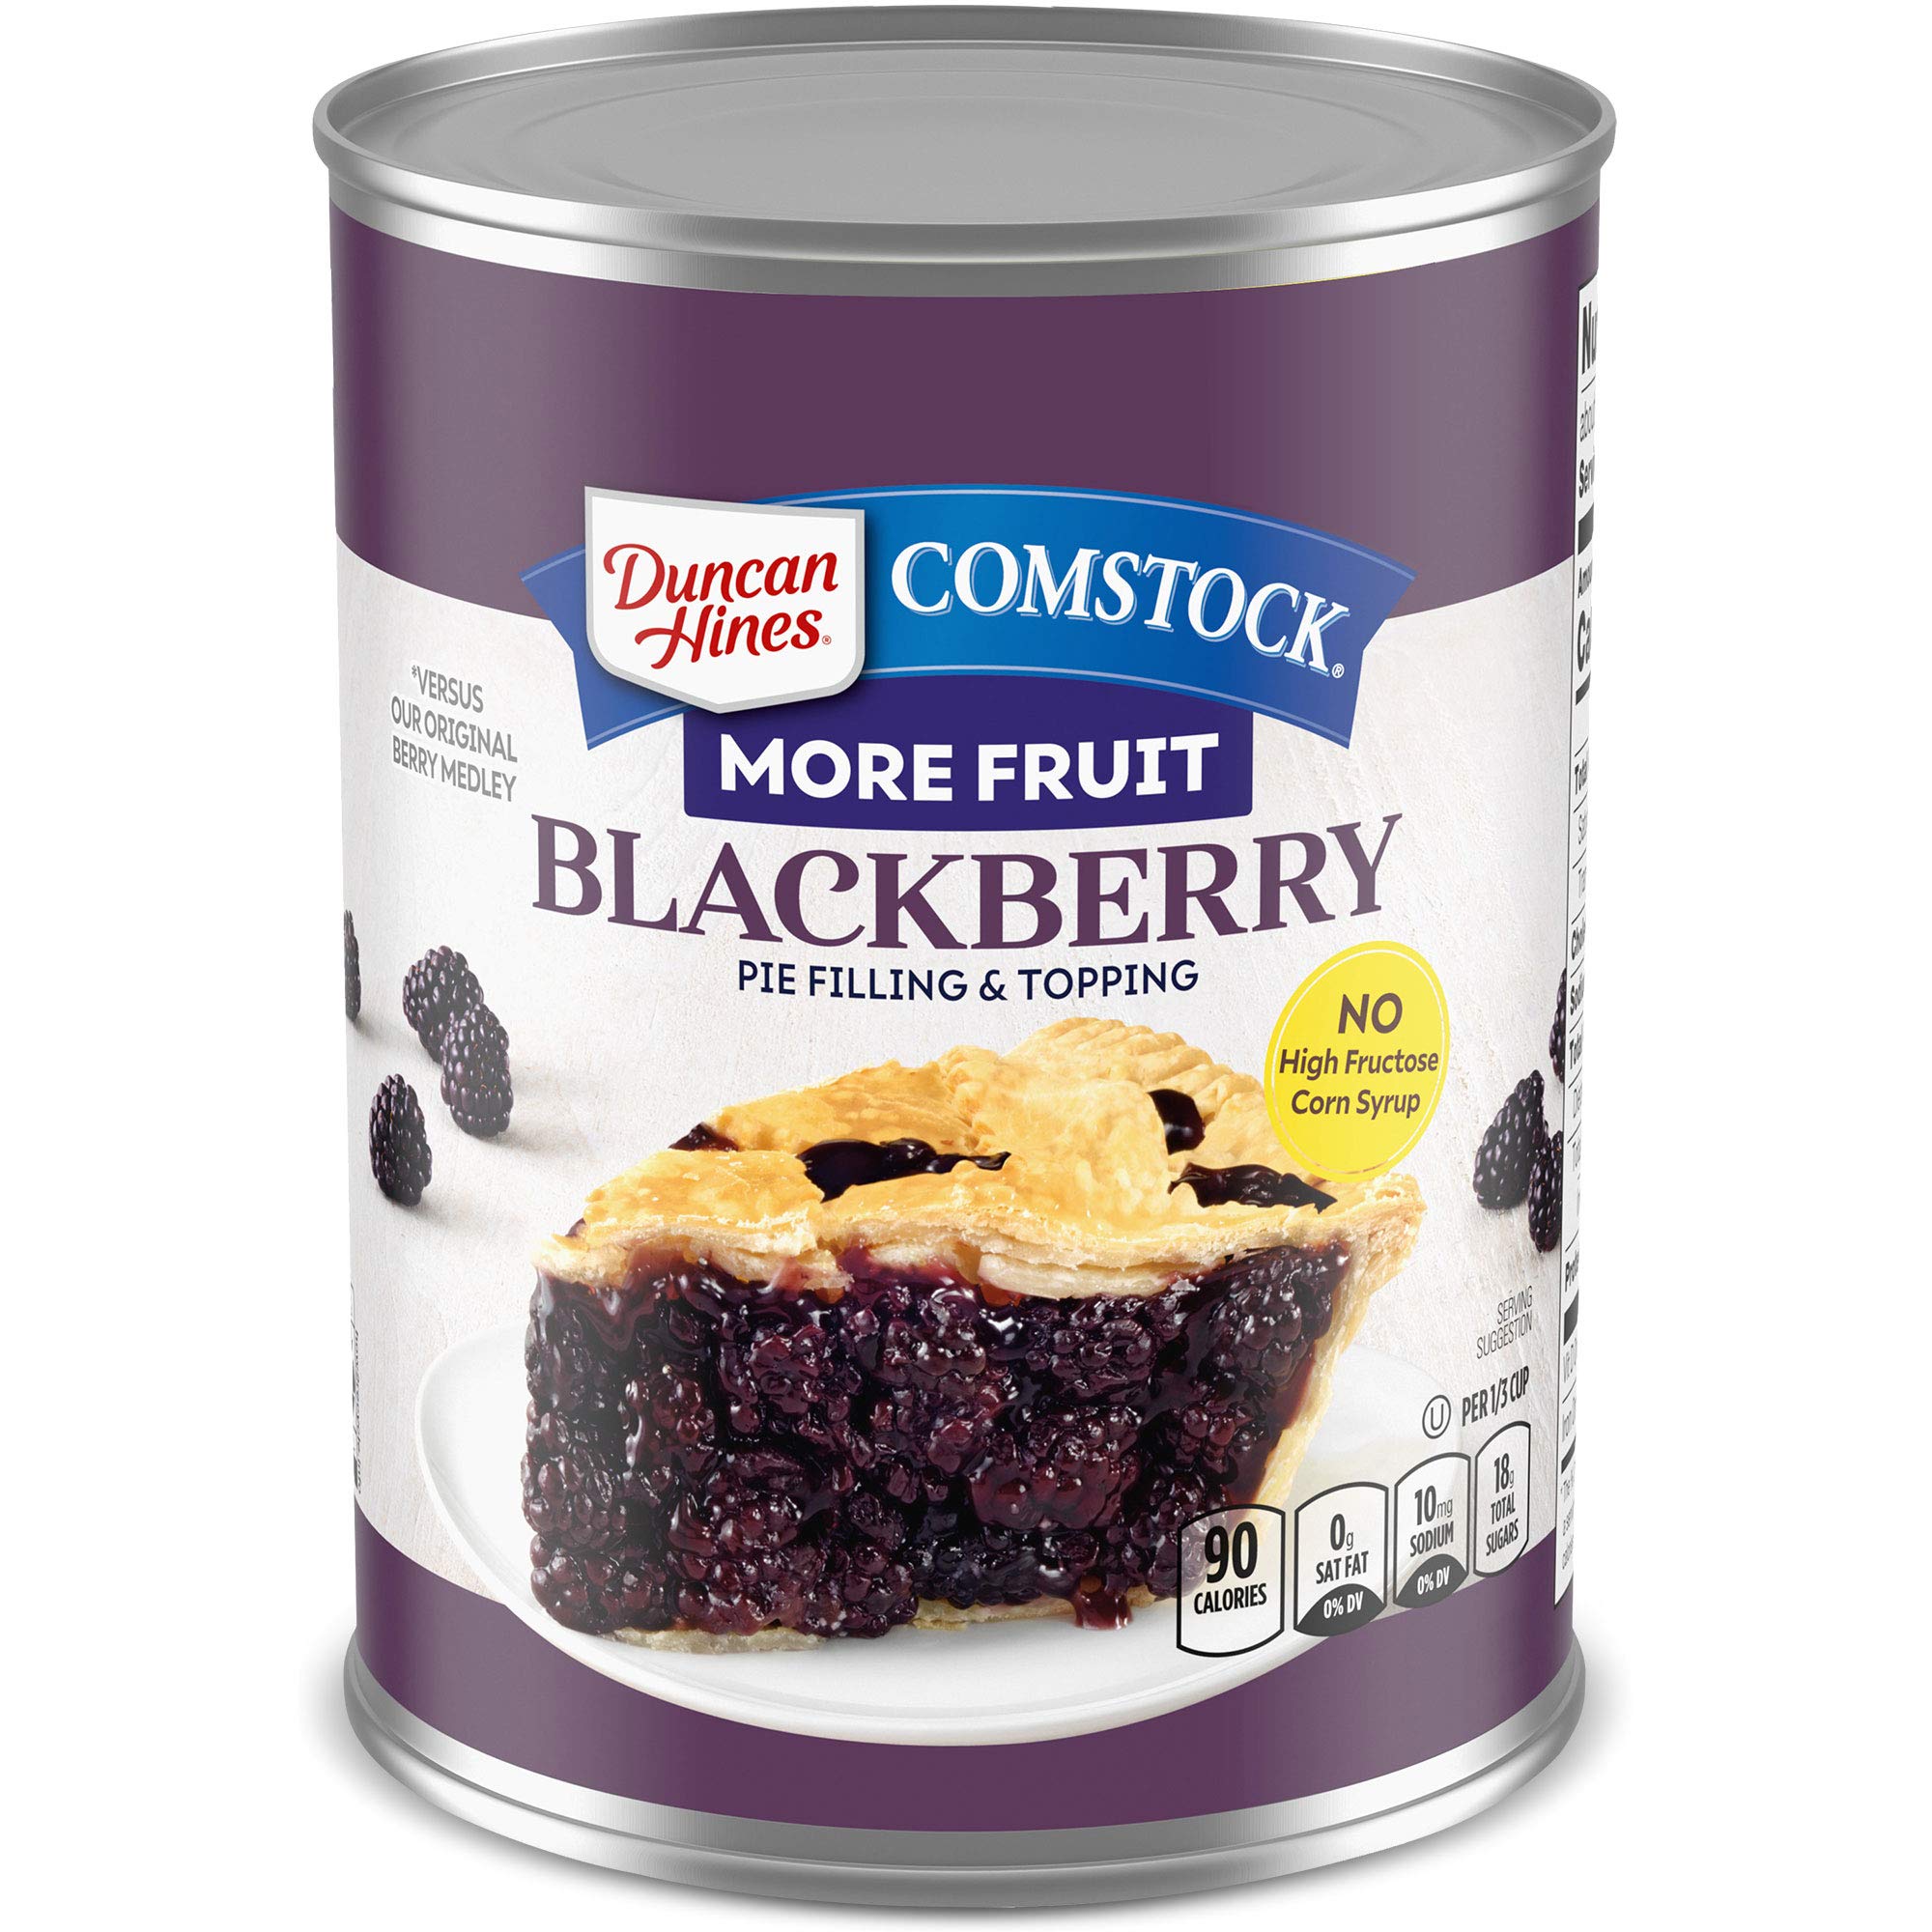 Duncan Hines Comstock Blackberry Premium Fruit Pie Filling-Pack of 12, 21 Ounce Cans-$16.96-Amazon